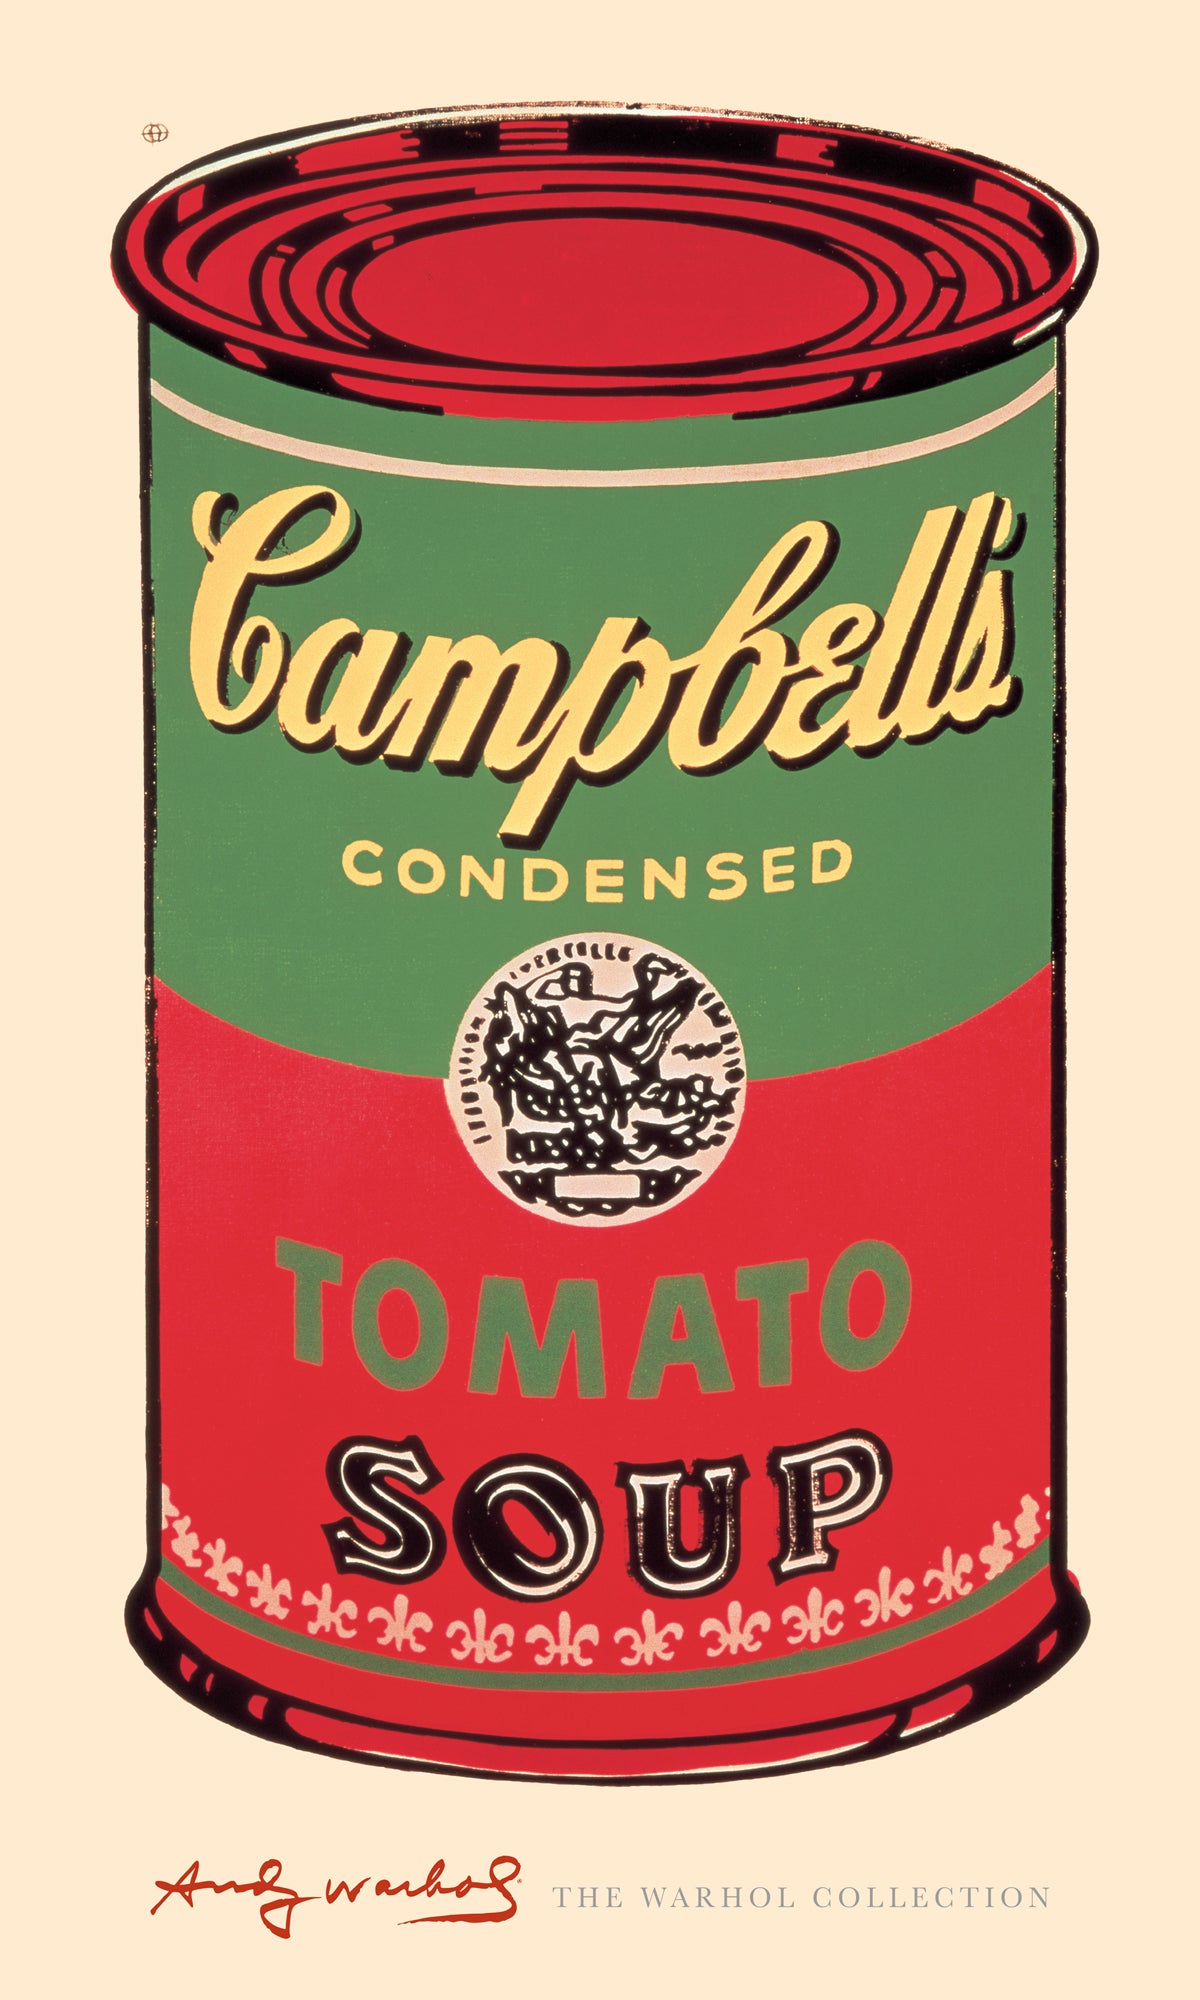 Andy Warhol - Campbell's Soup V